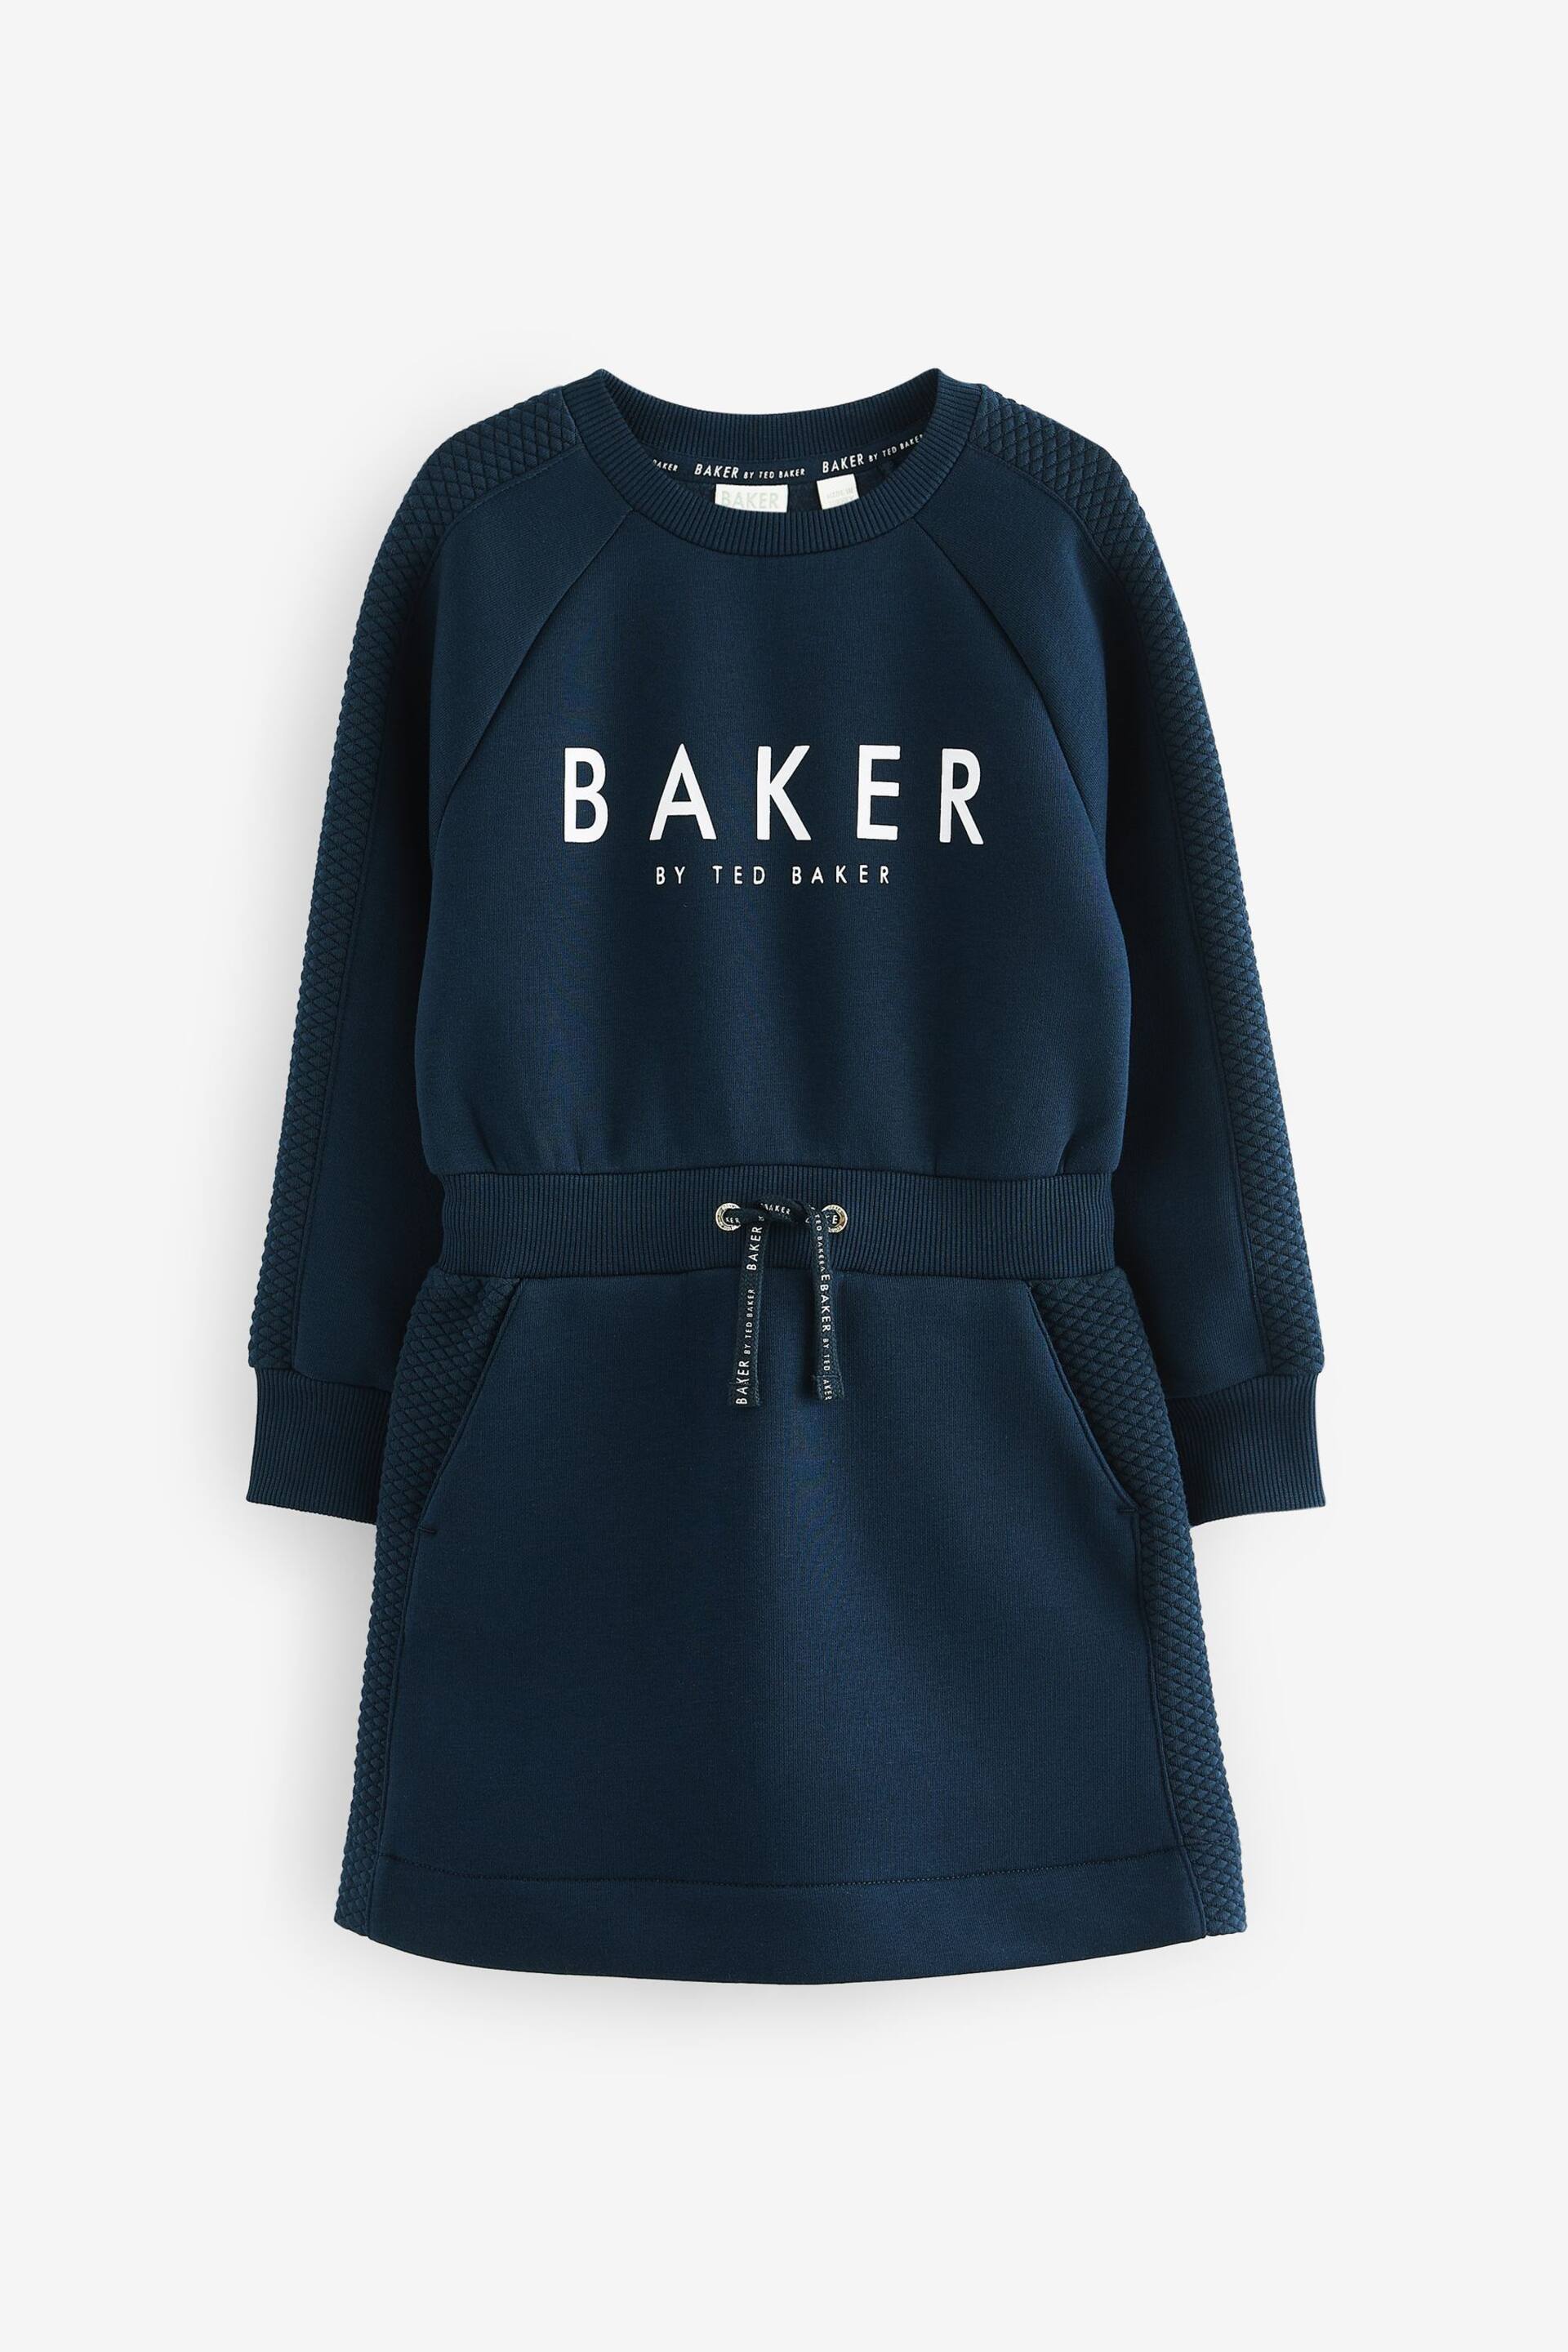 Baker by Ted Baker Quilted Sweat Dress - Image 6 of 10